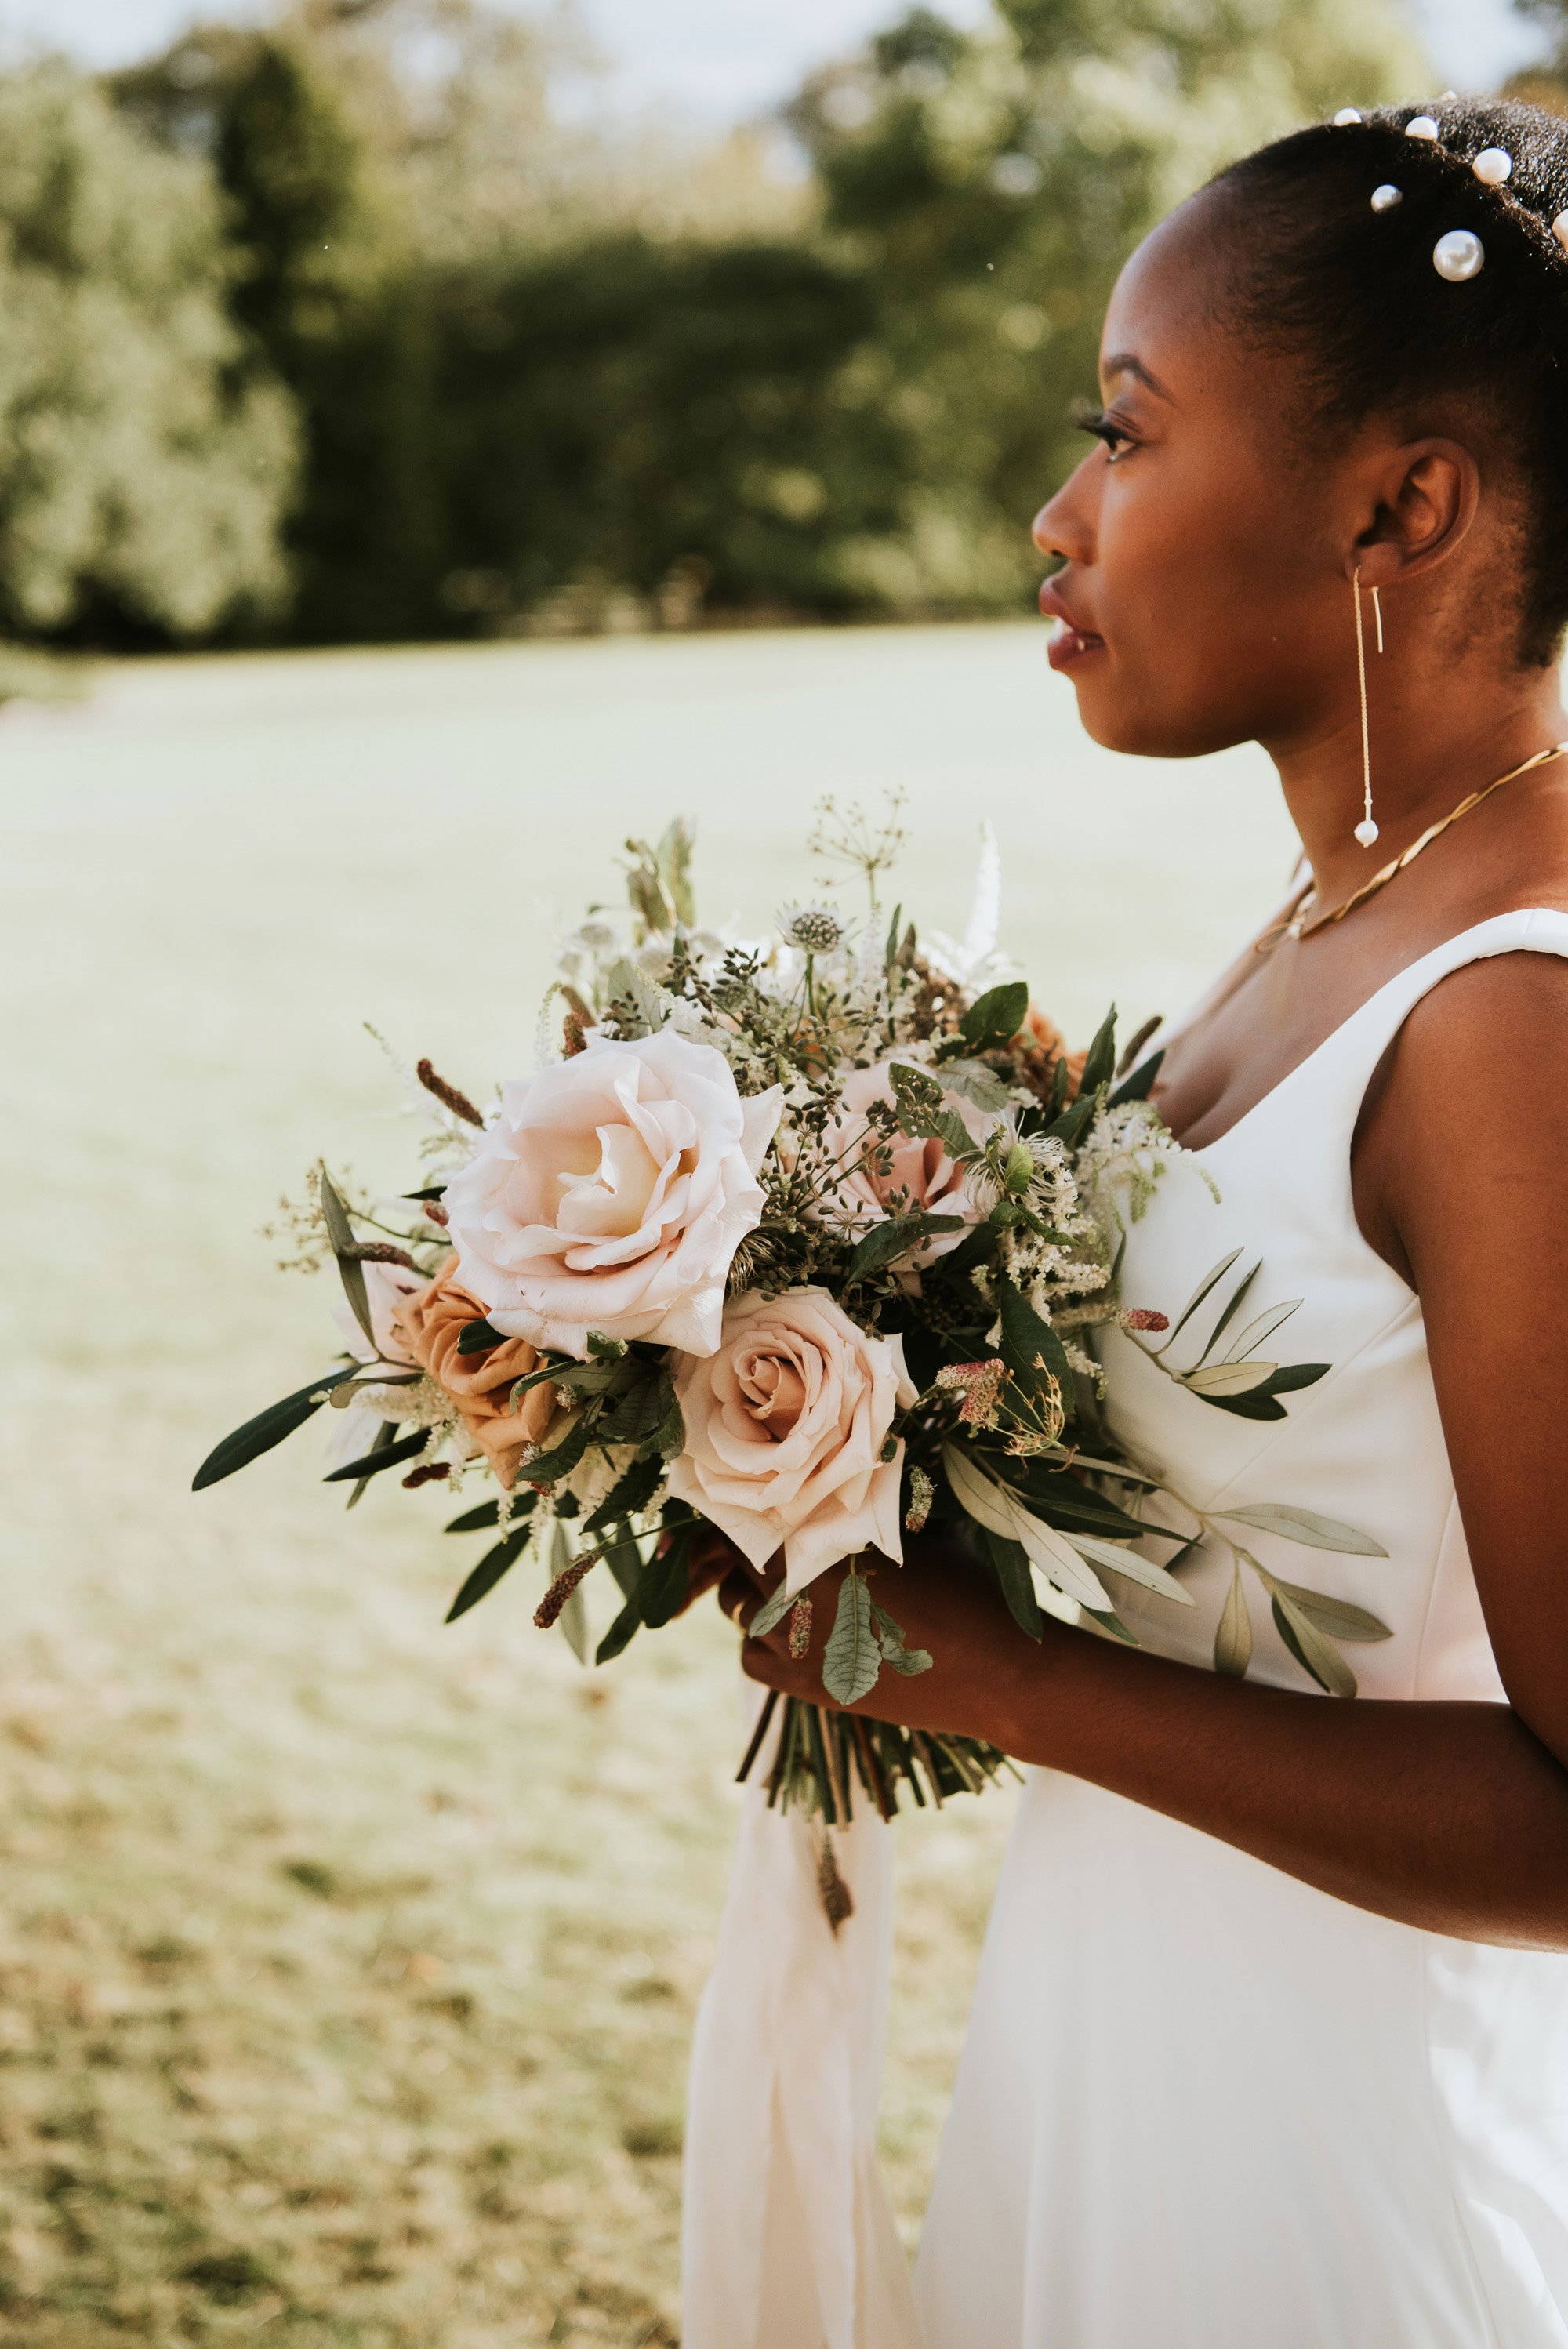 Modern black bride wearing pearl drop earrings and pearls in her hair carrying bouquet of pale pink roses and greenery outside her stately home wedding venue